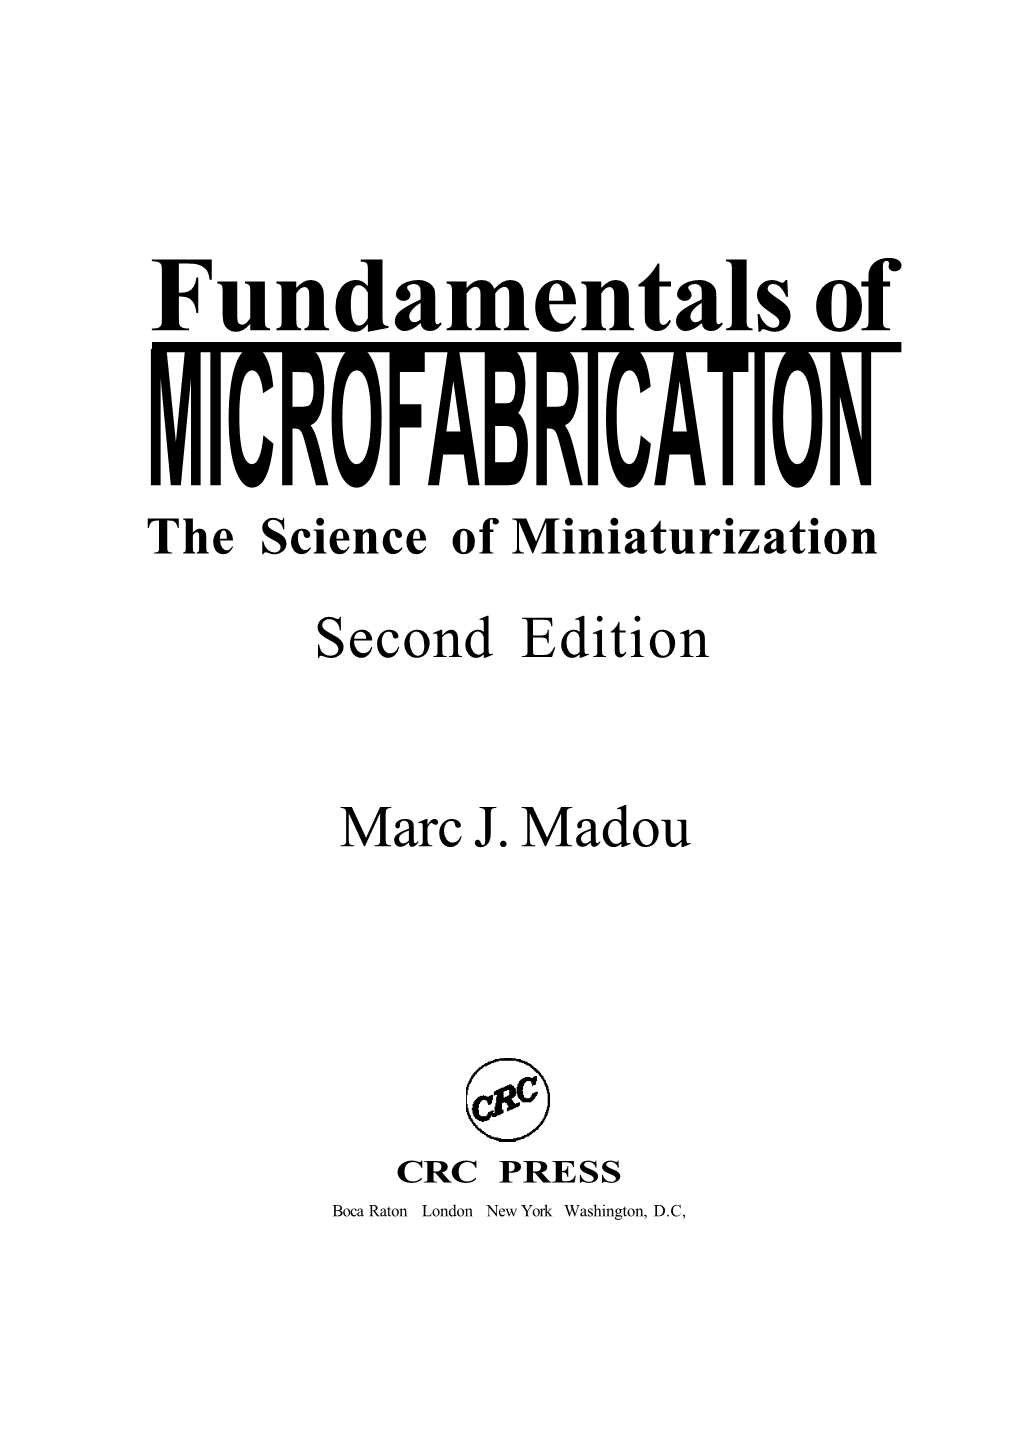 Fundamentals of MICROFABRICATION the Science of Miniaturization Second Edition